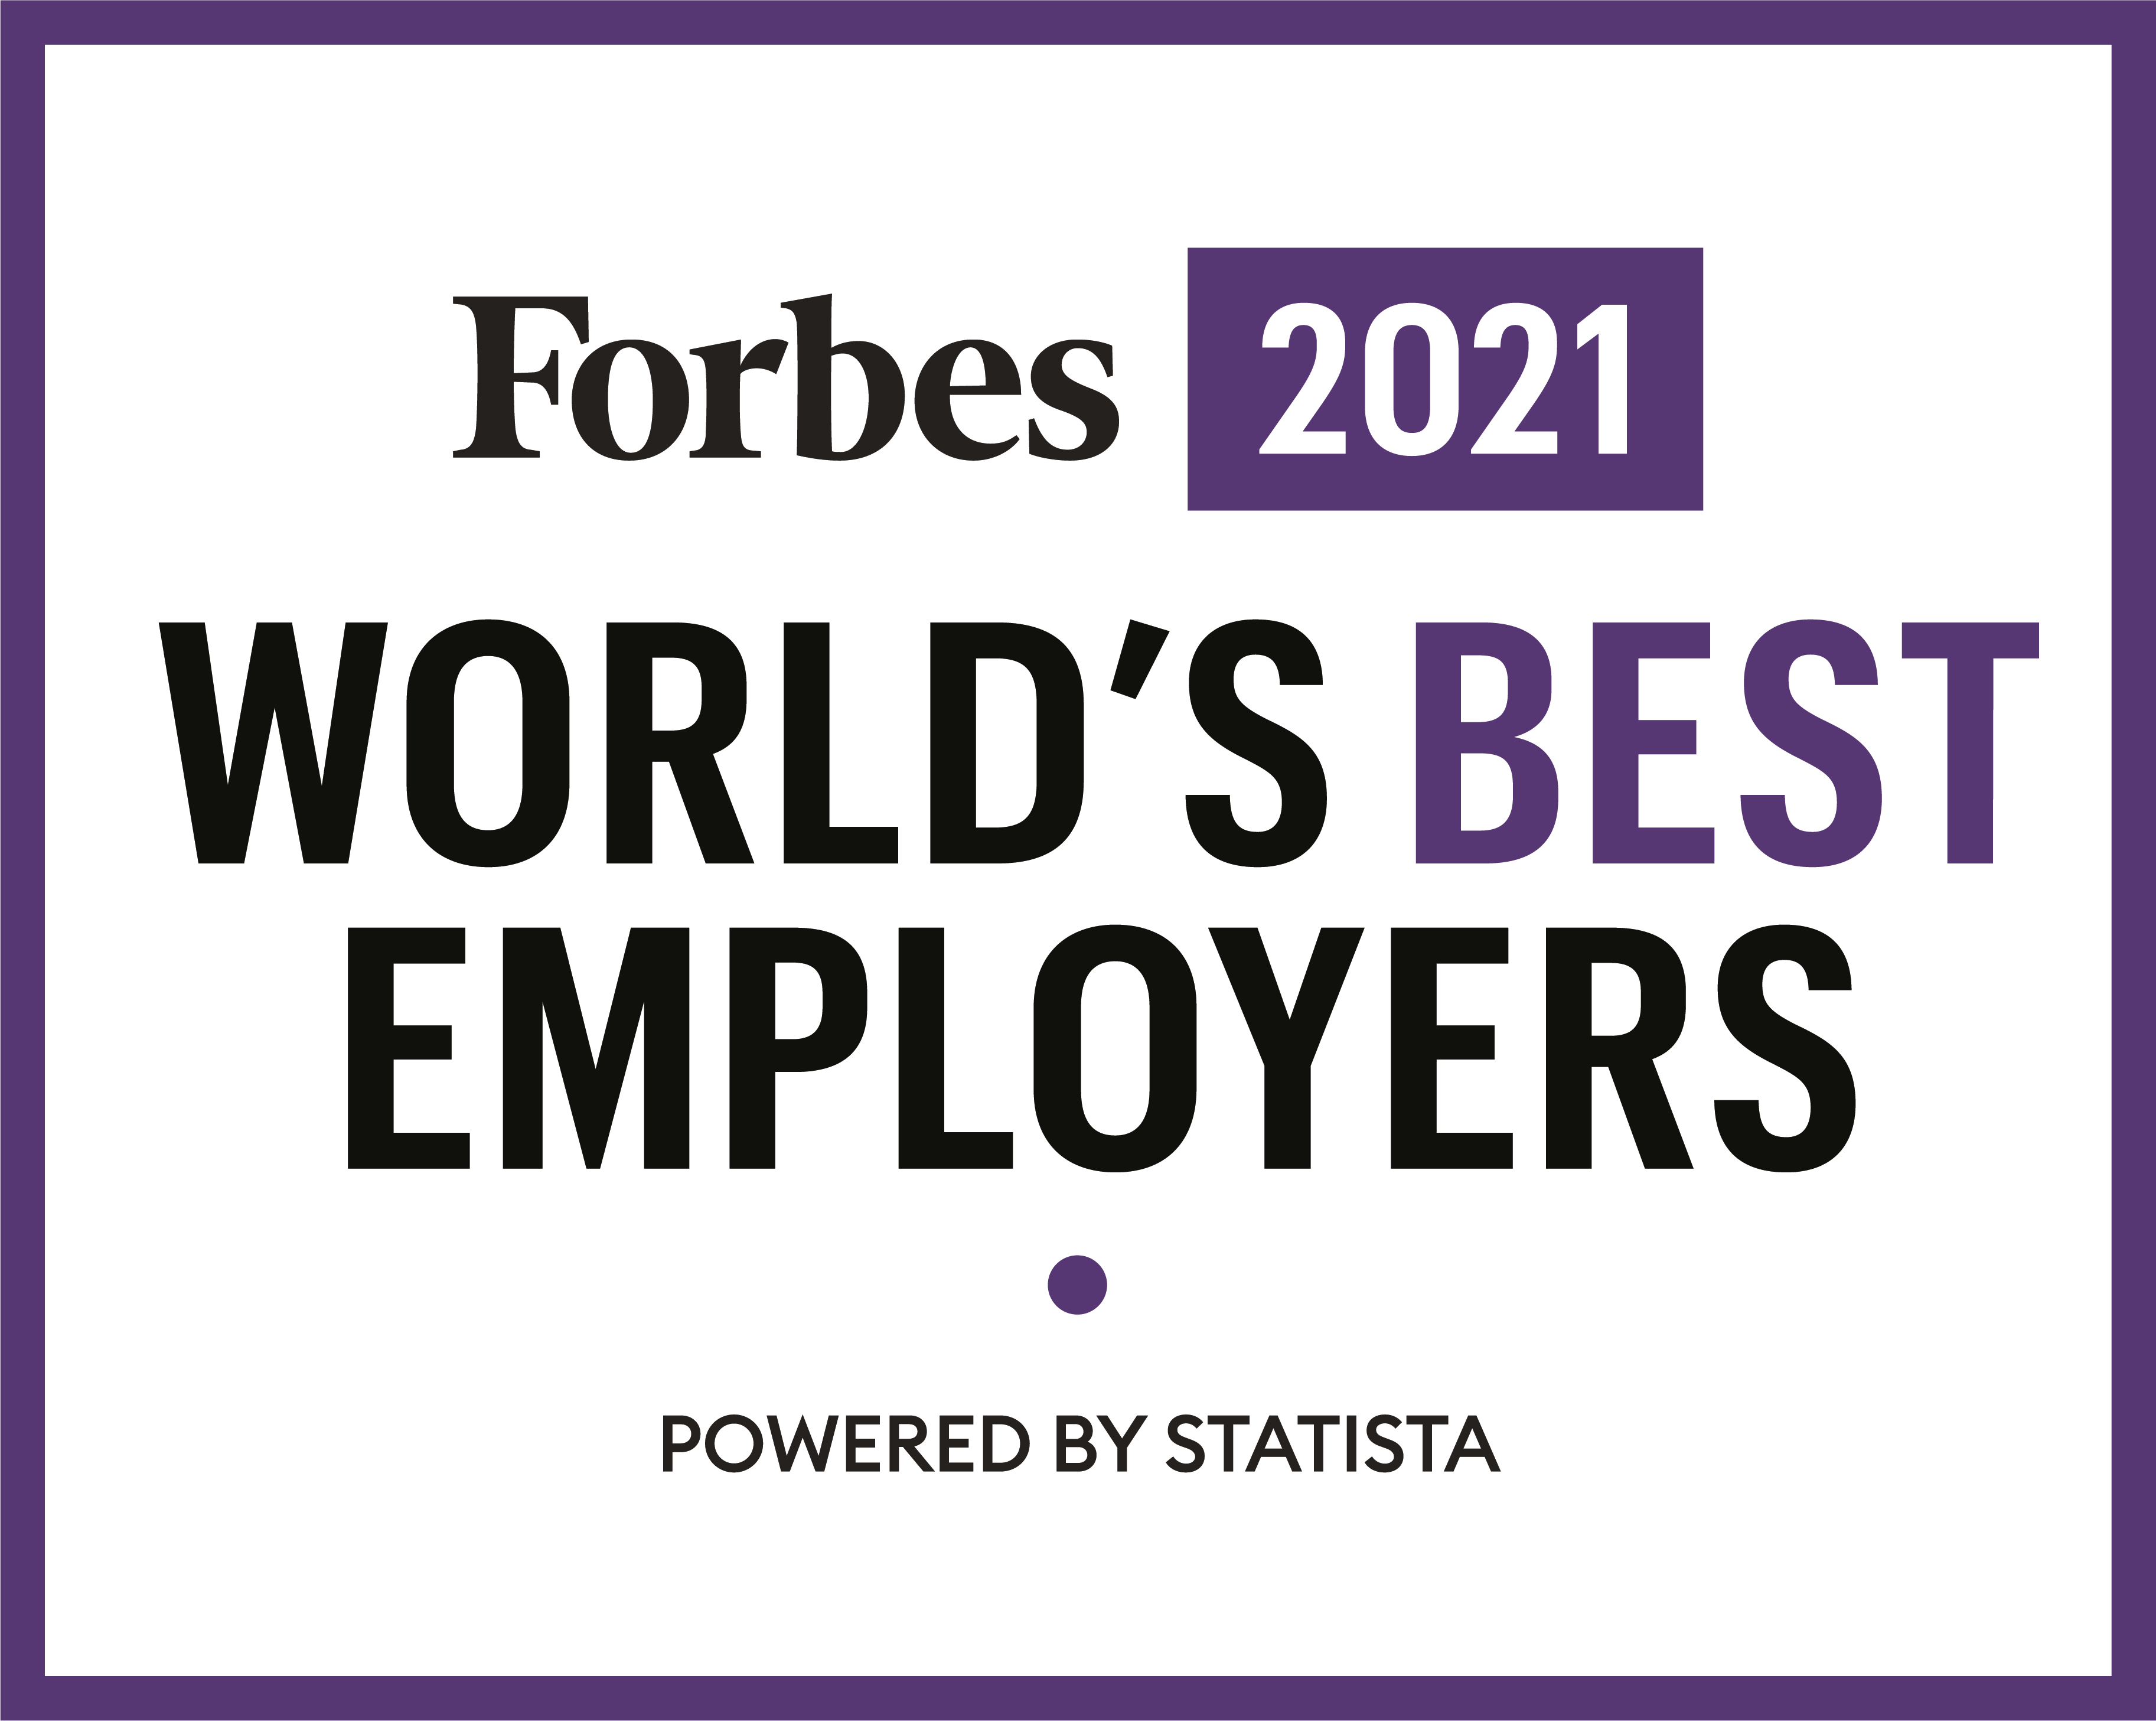 Forbes World's Best Employer recognition